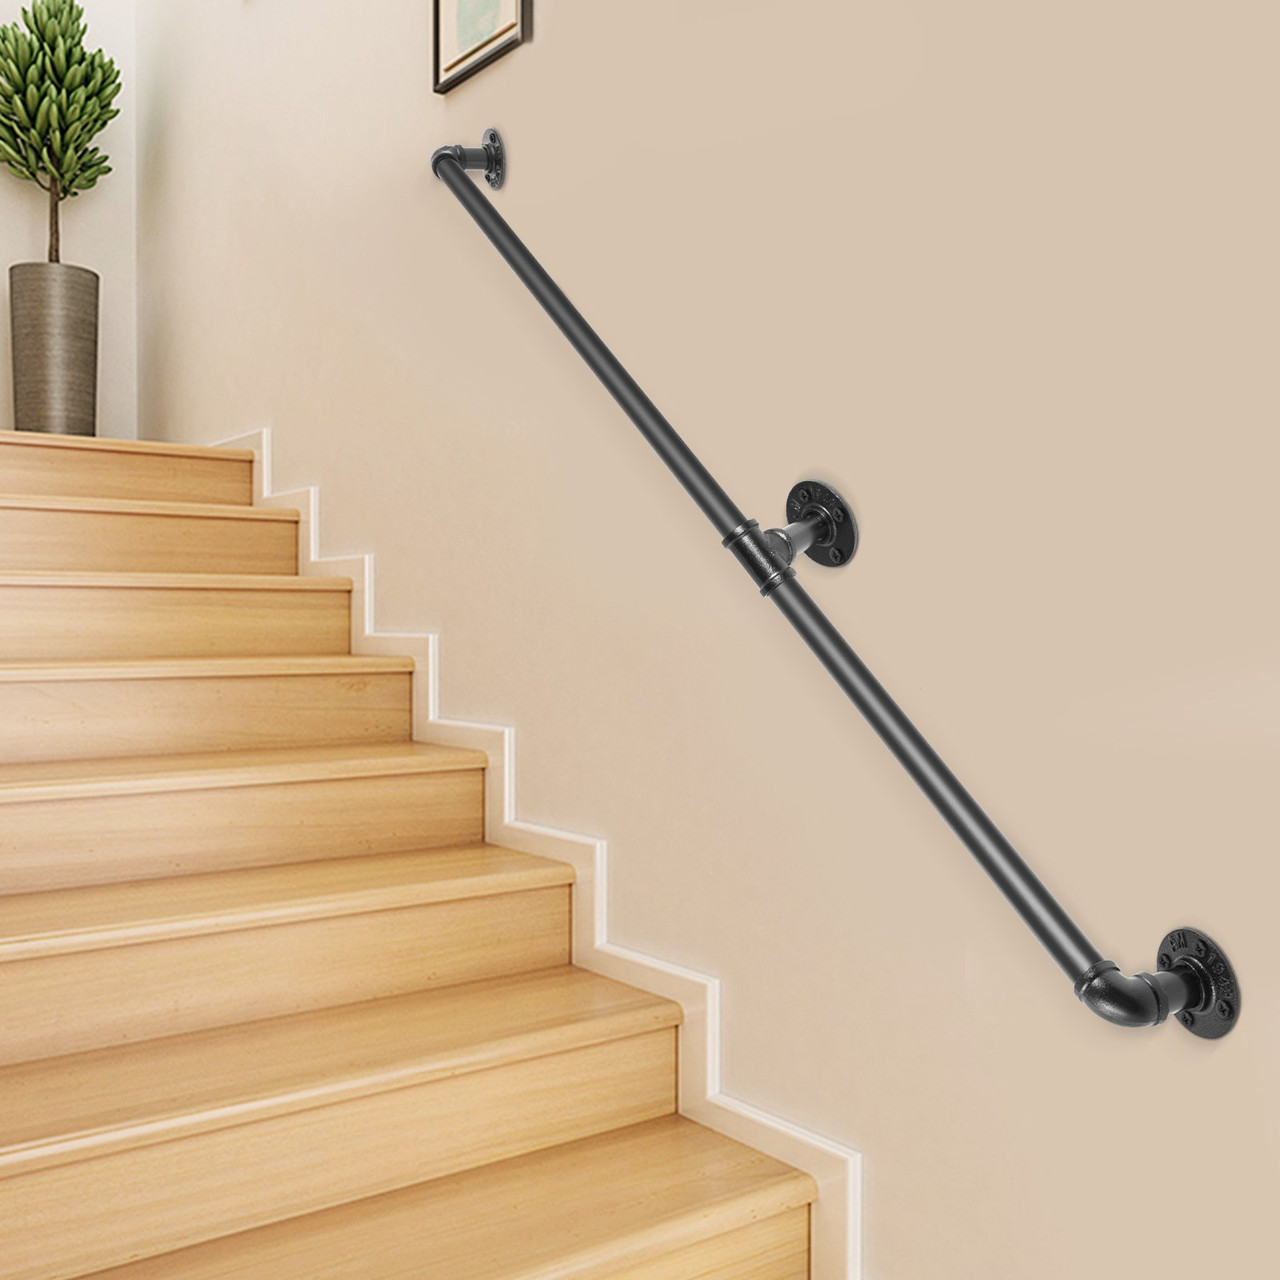 Pipe Stair Handrail, 5FT Staircase Handrail, 440LBS Load Capacity Carbon Steel Pipe Handrail, Industrial Pipe Handrail with Wall Mount Support, Round Corner Wall Handrailings for Indoor, Outdoor